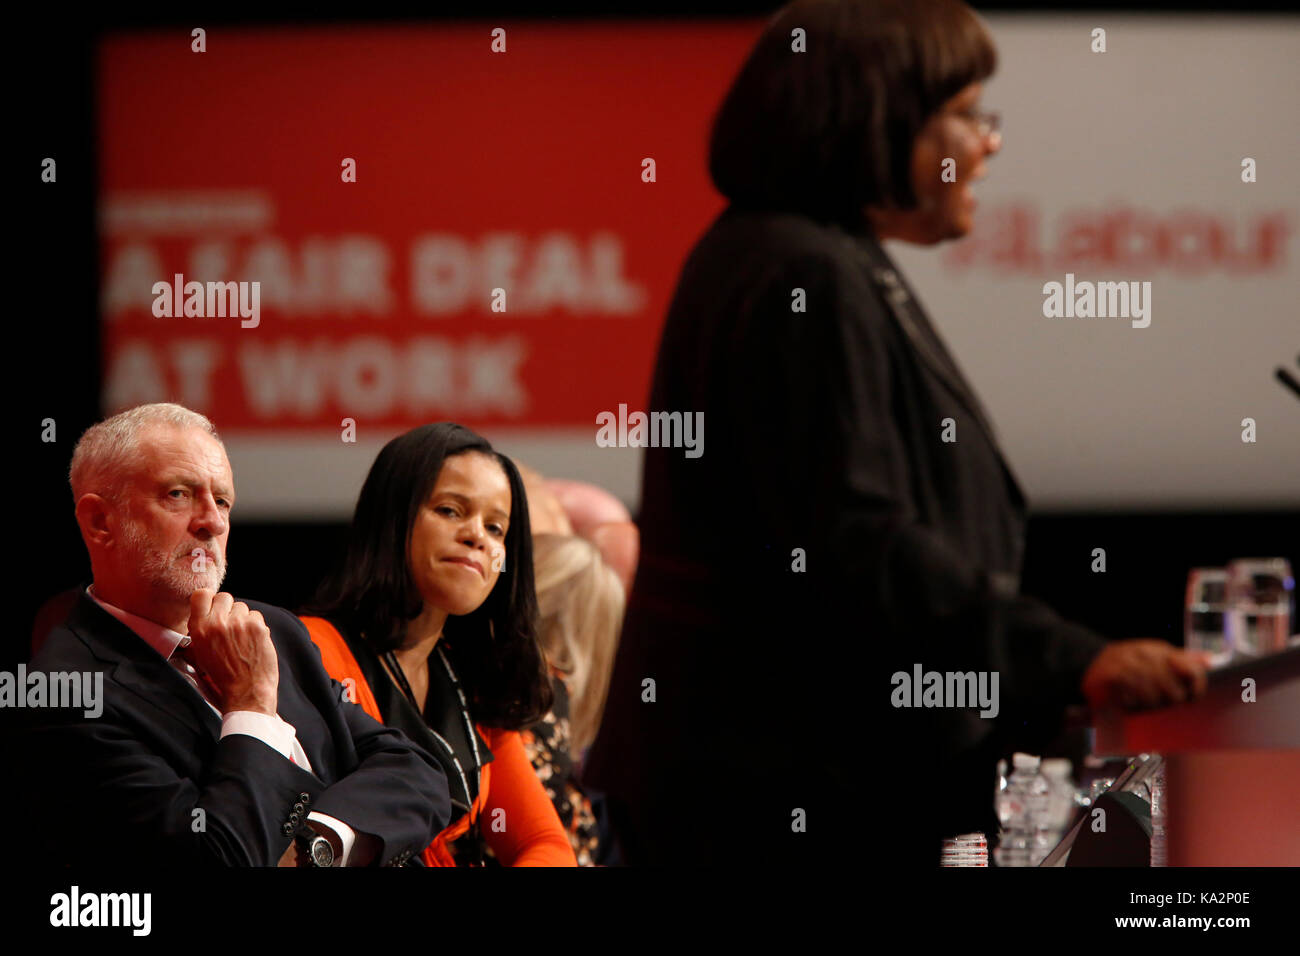 Brighton, UK. 24th September, 2017. Jeremy Corbyn, leader of Britain's opposition Labour party listens to Diane Abbott, Shadow Home Secretary, during the annual Labour Party Conference in Brighton, UK Sunday, September 24, 2017. Photograph : Credit: Luke MacGregor/Alamy Live News Stock Photo